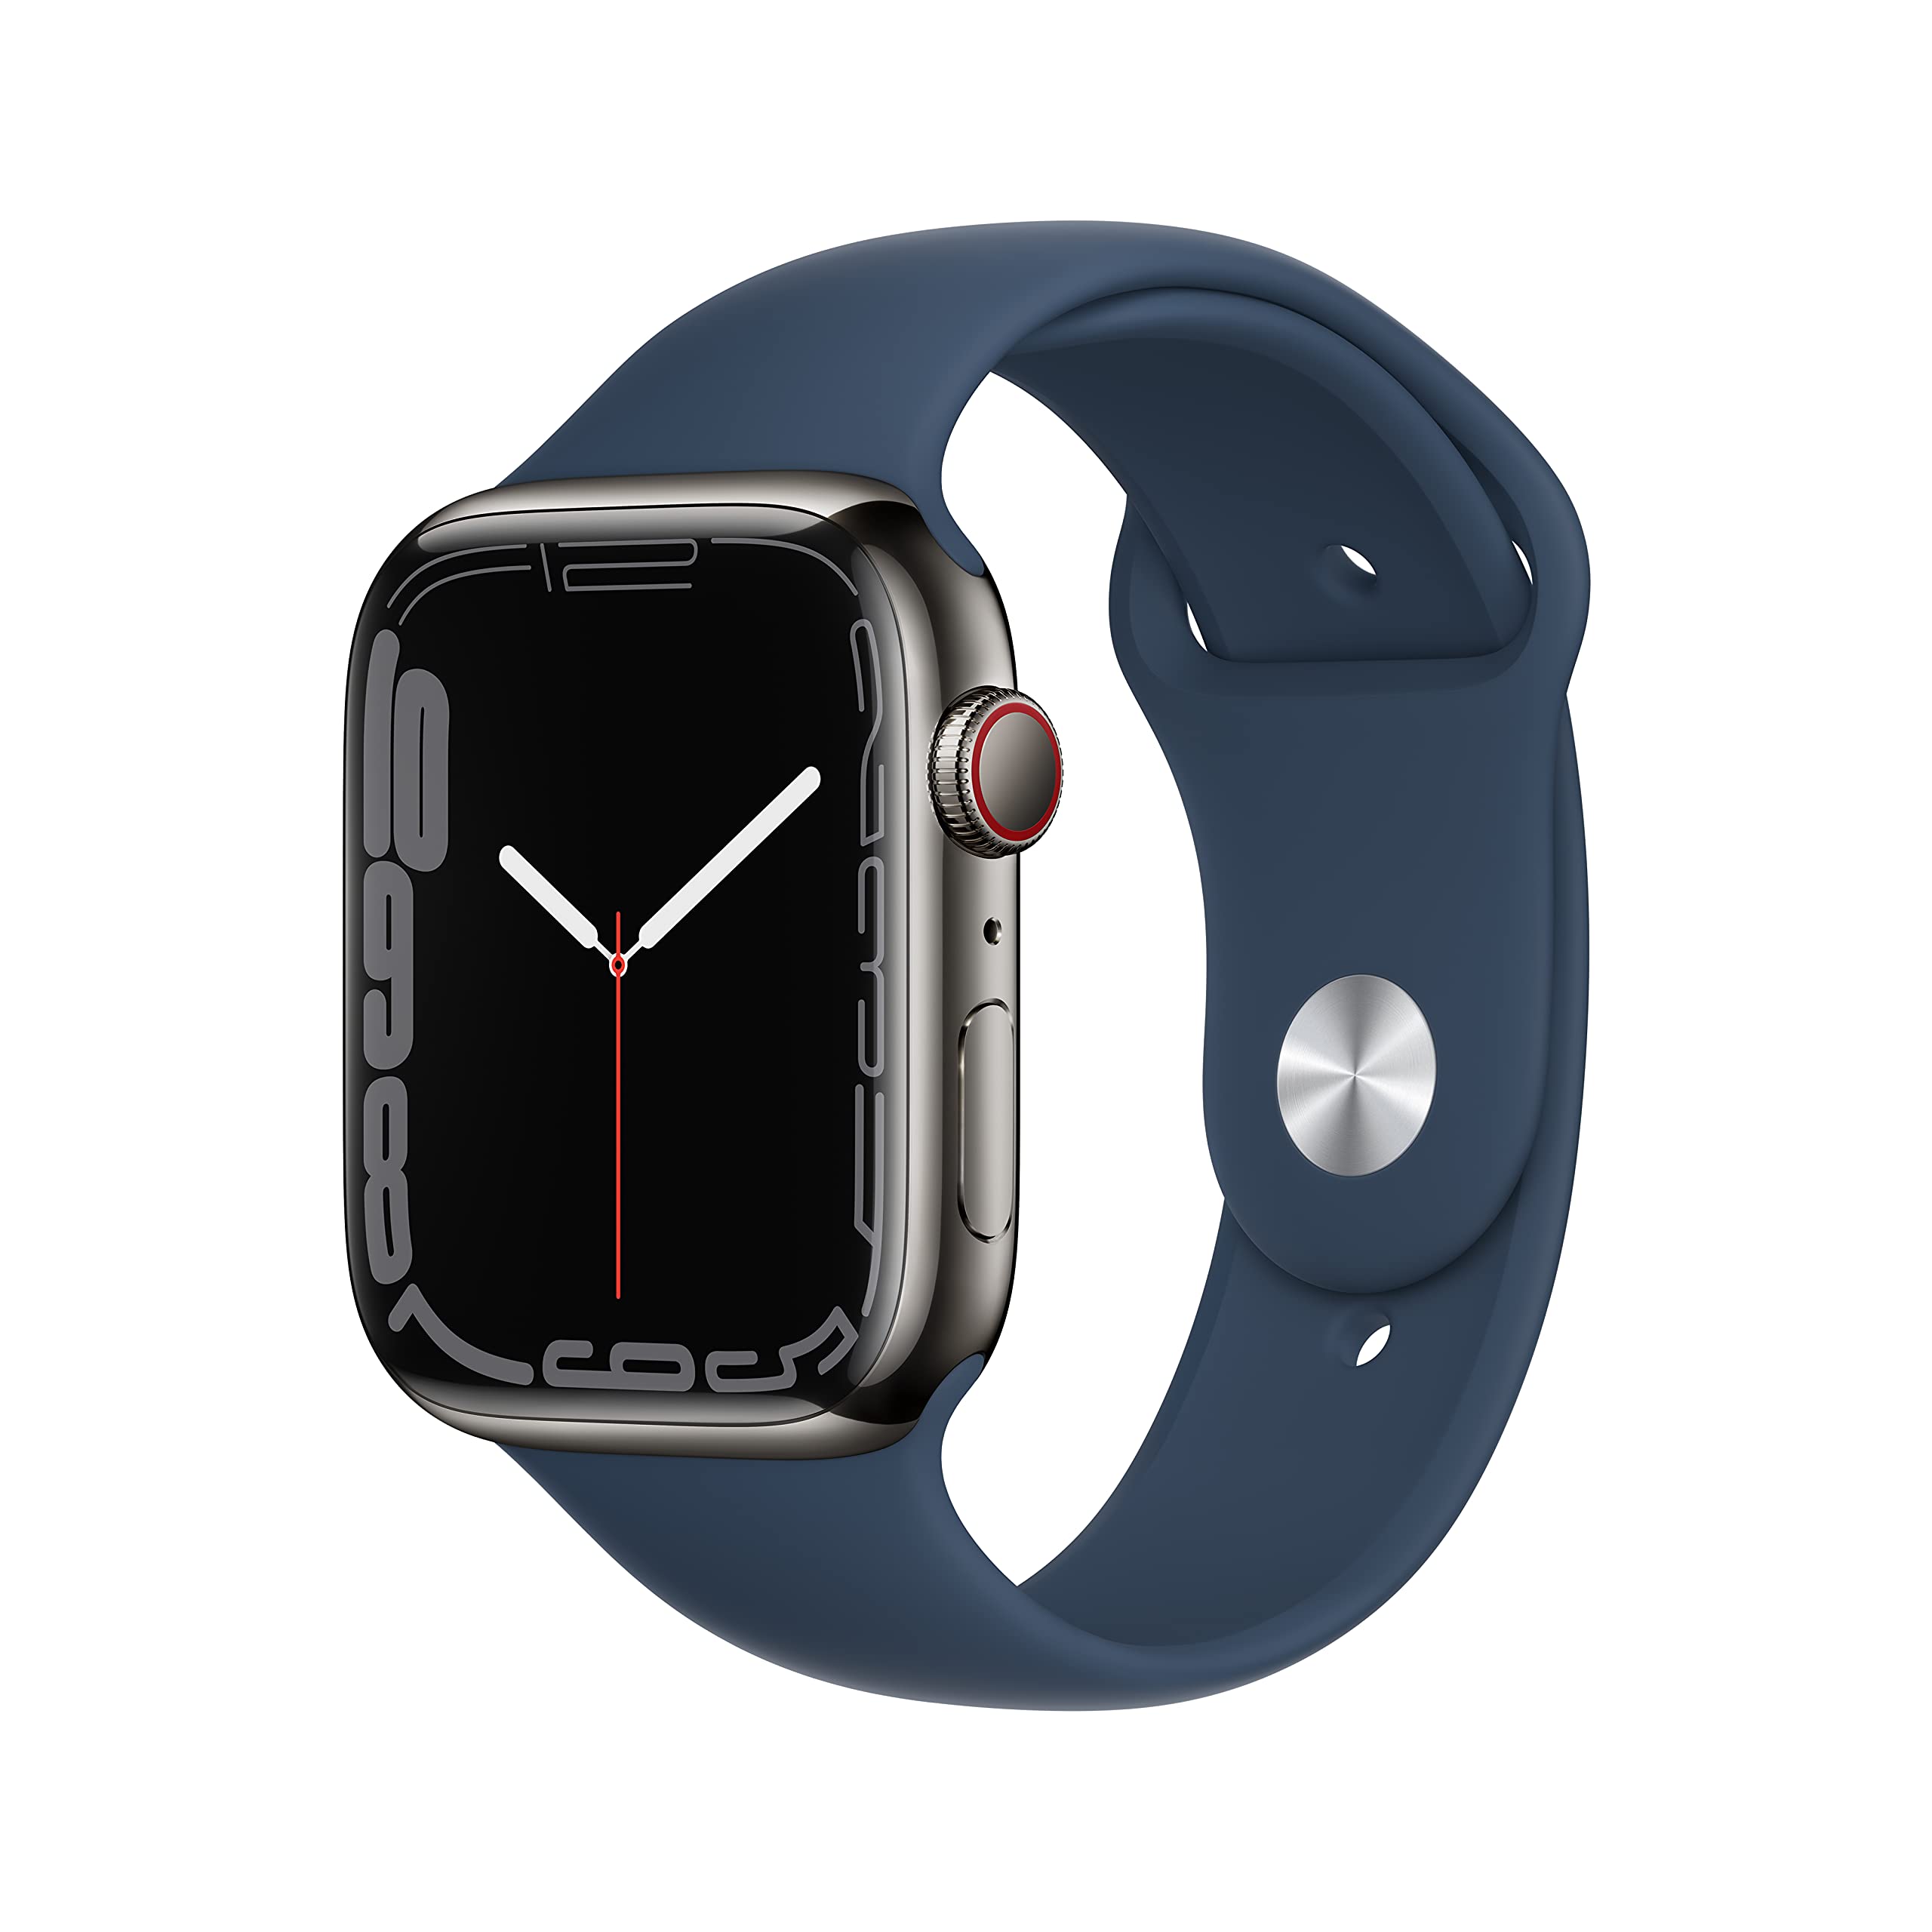 Apple Watch Series 7 [GPS + Cellular 45mm] Smart Watch w/Graphite Stainless Steel Case with Abyss Blue Sport Band. Fitness Tracker, Blood Oxygen & ECG Apps, Always-On Ret - $308.49